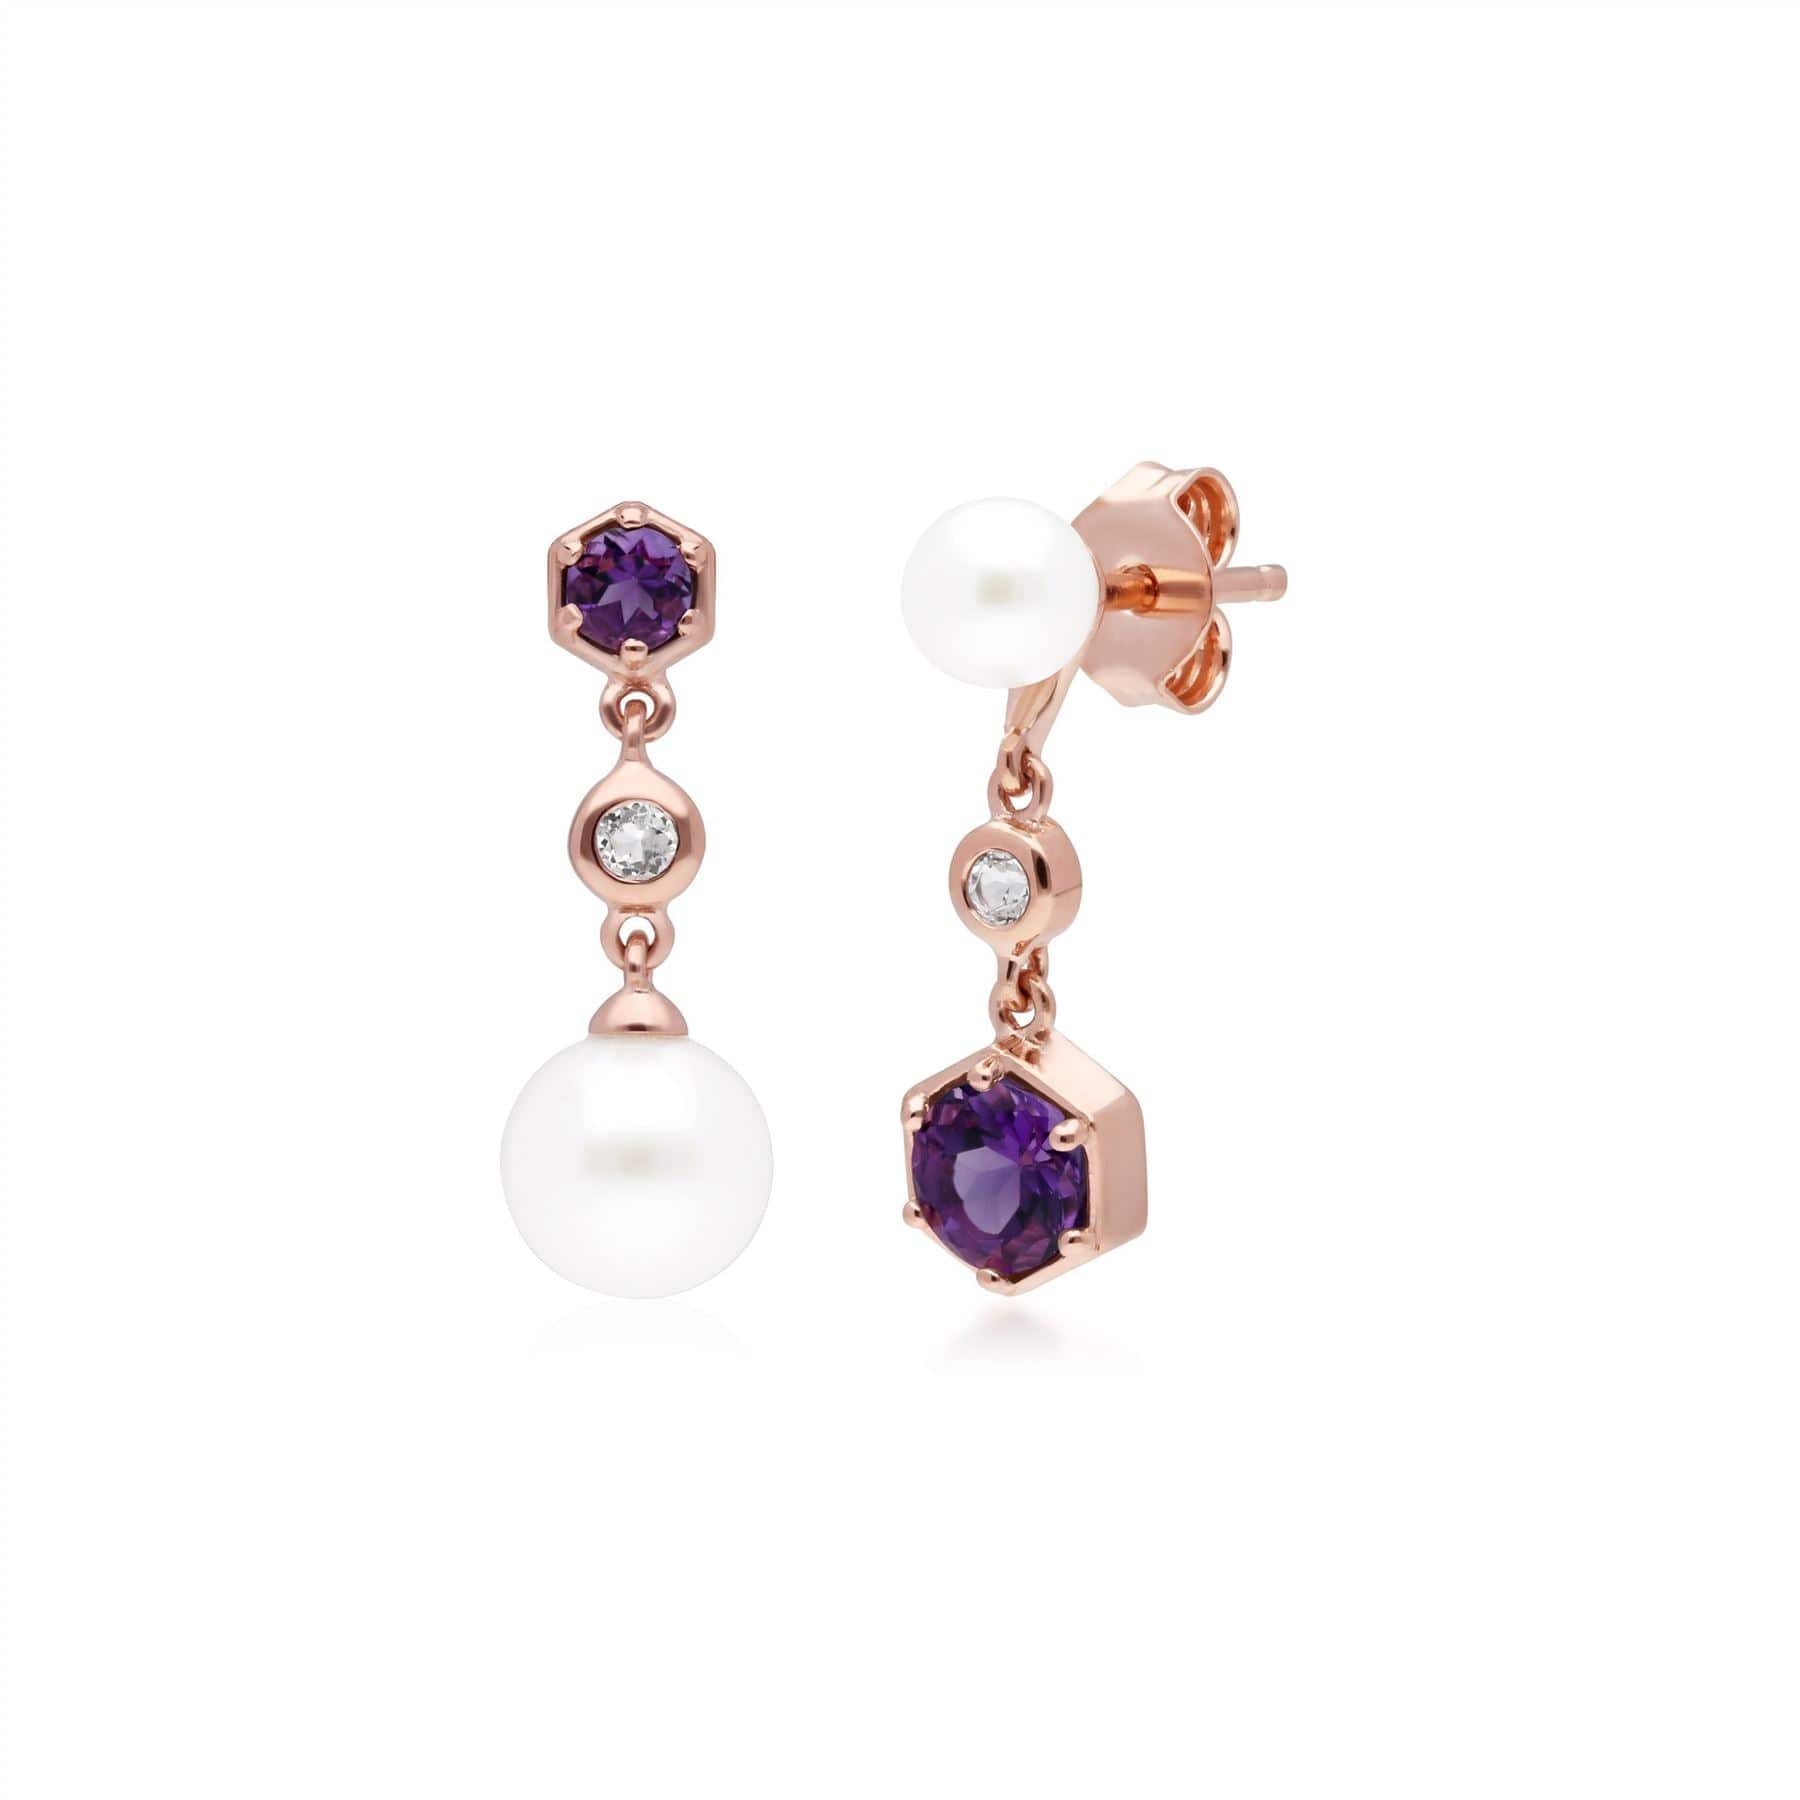 270E030304925 Modern Pearl, Amethyst & Topaz Mismatched Drop Earrings in Rose Gold Plated Silver 1